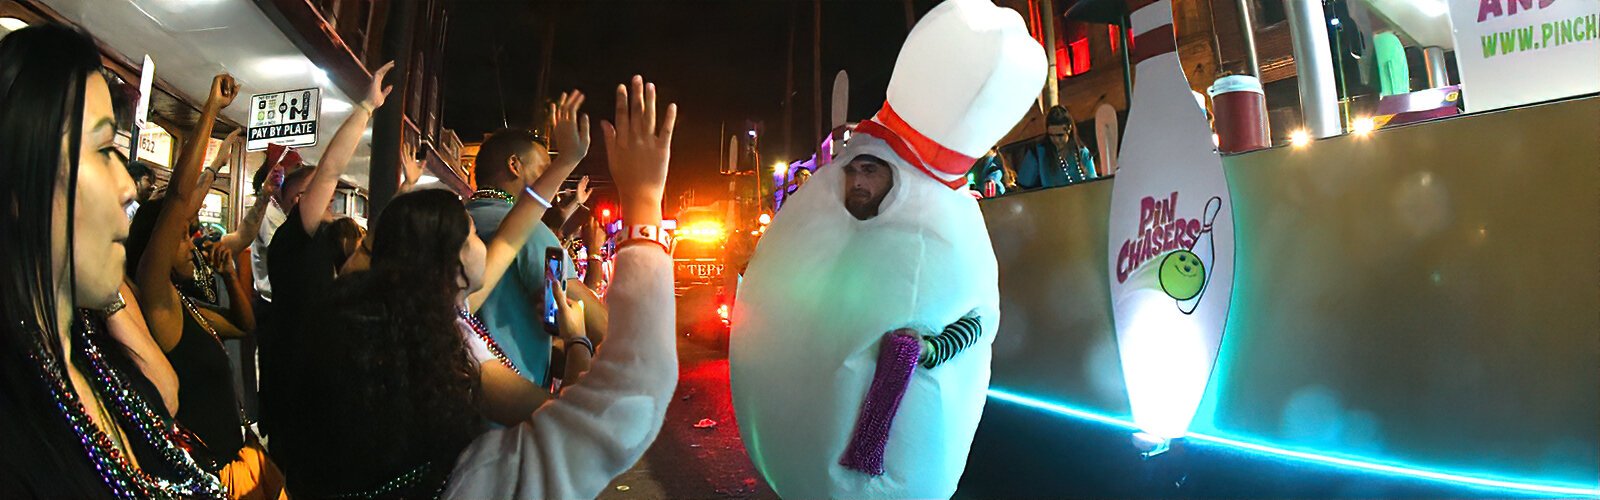  Wearing a bowling pin costume, a member of the Pin Chasers entertains spectators along the Knight Parade route on Seventh Avenue in Ybor.